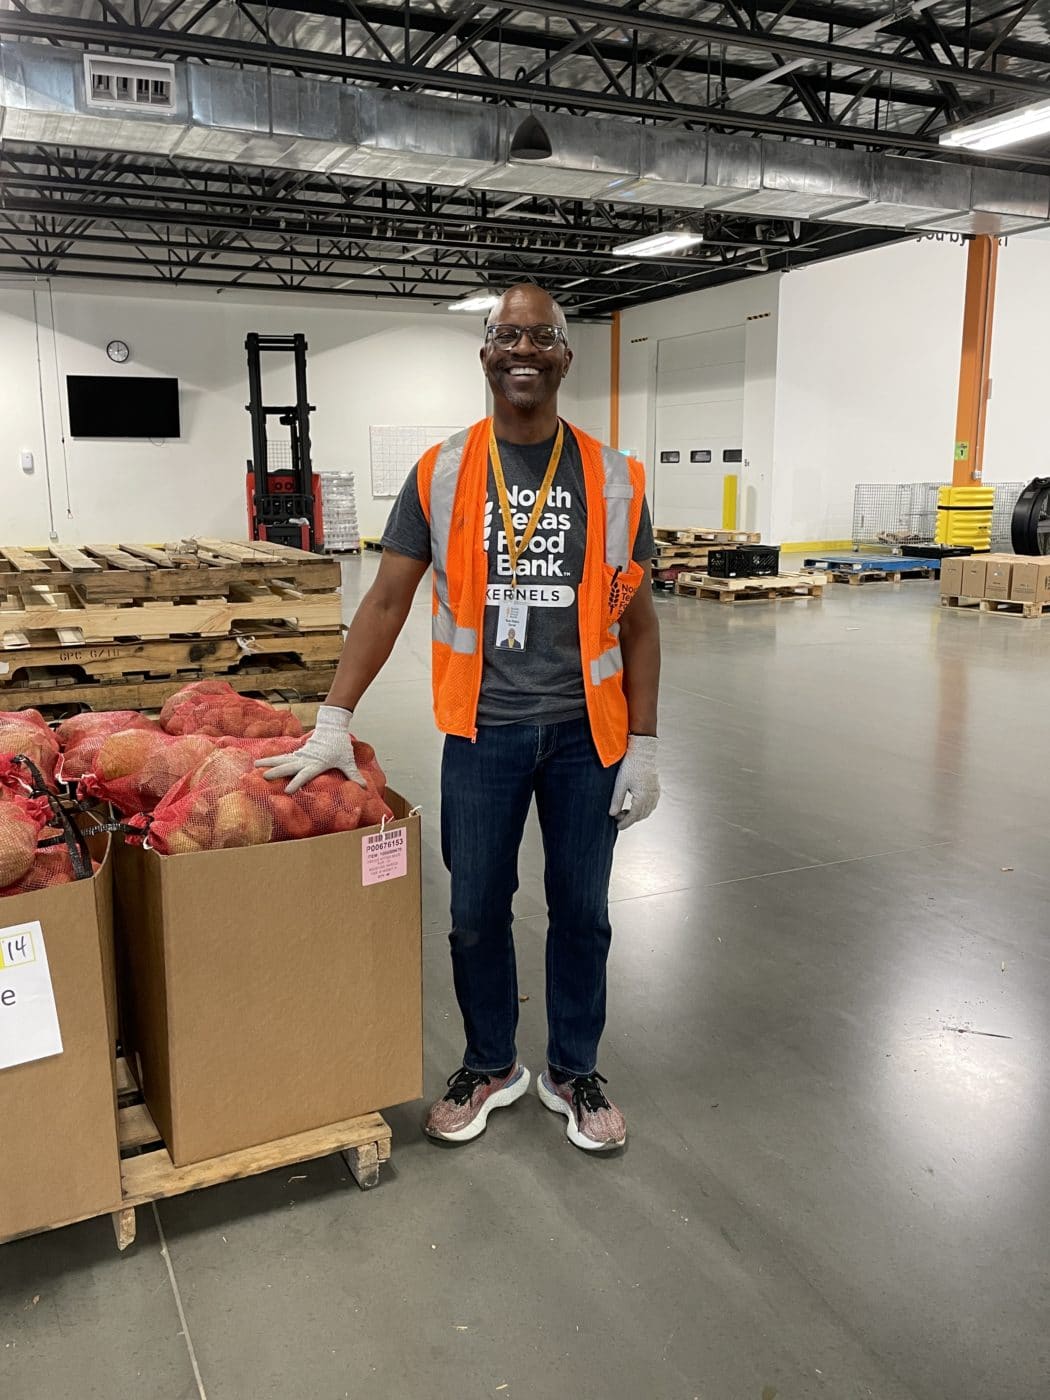 Many with orange safety vest smiling in warehouse next to box of potatoes